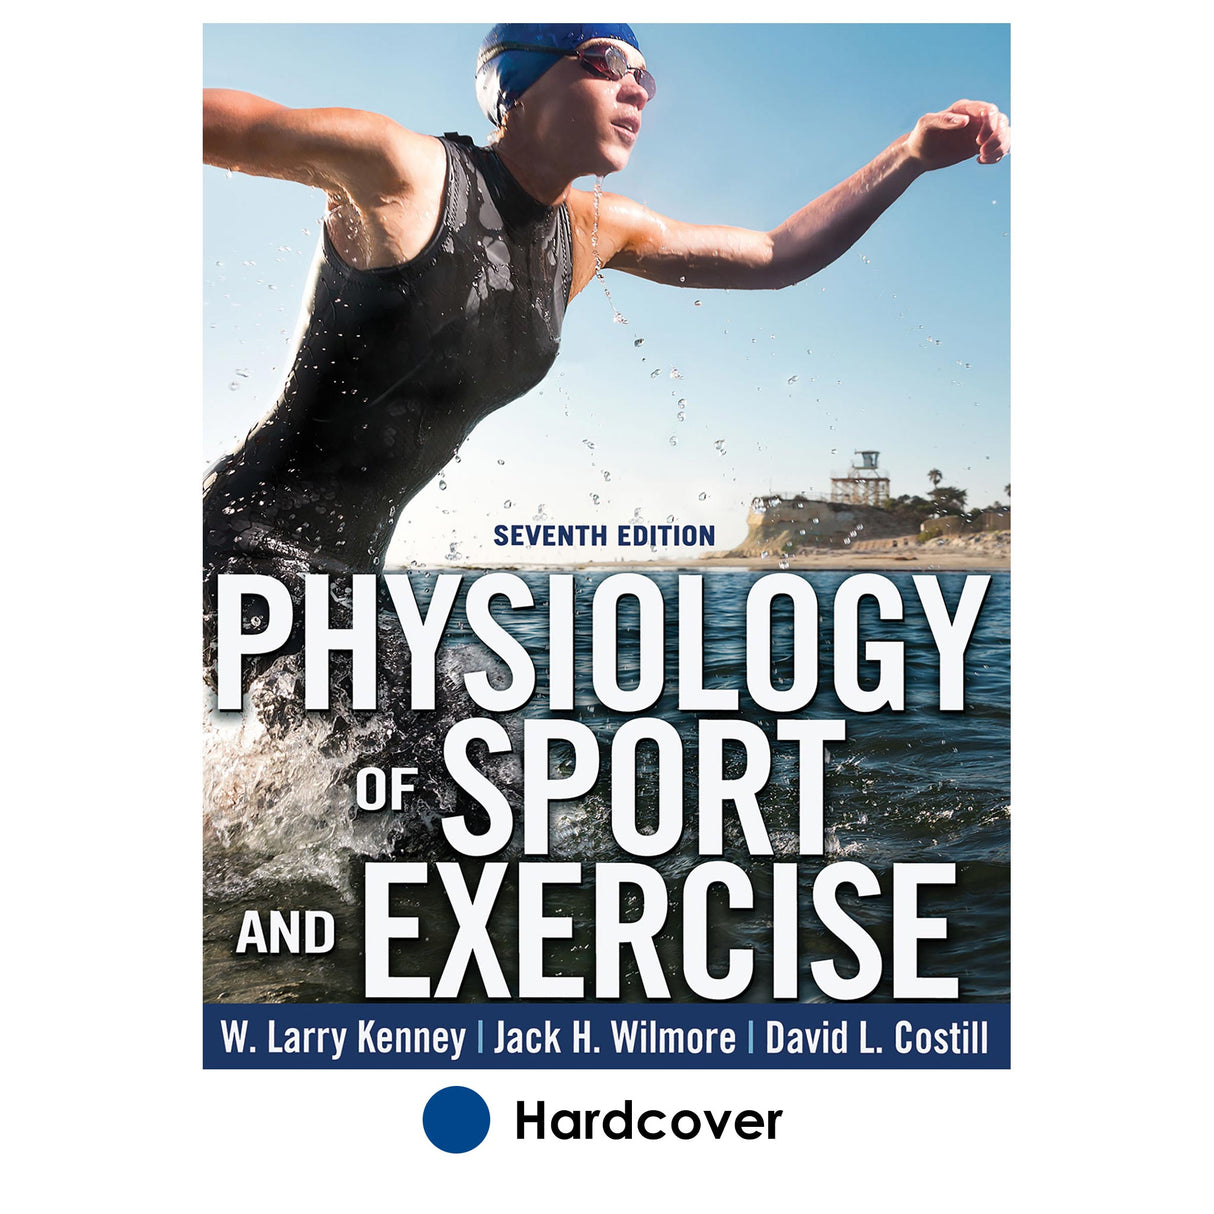 Physiology of Sport and Exercise 7th Edition With Web Study Guide